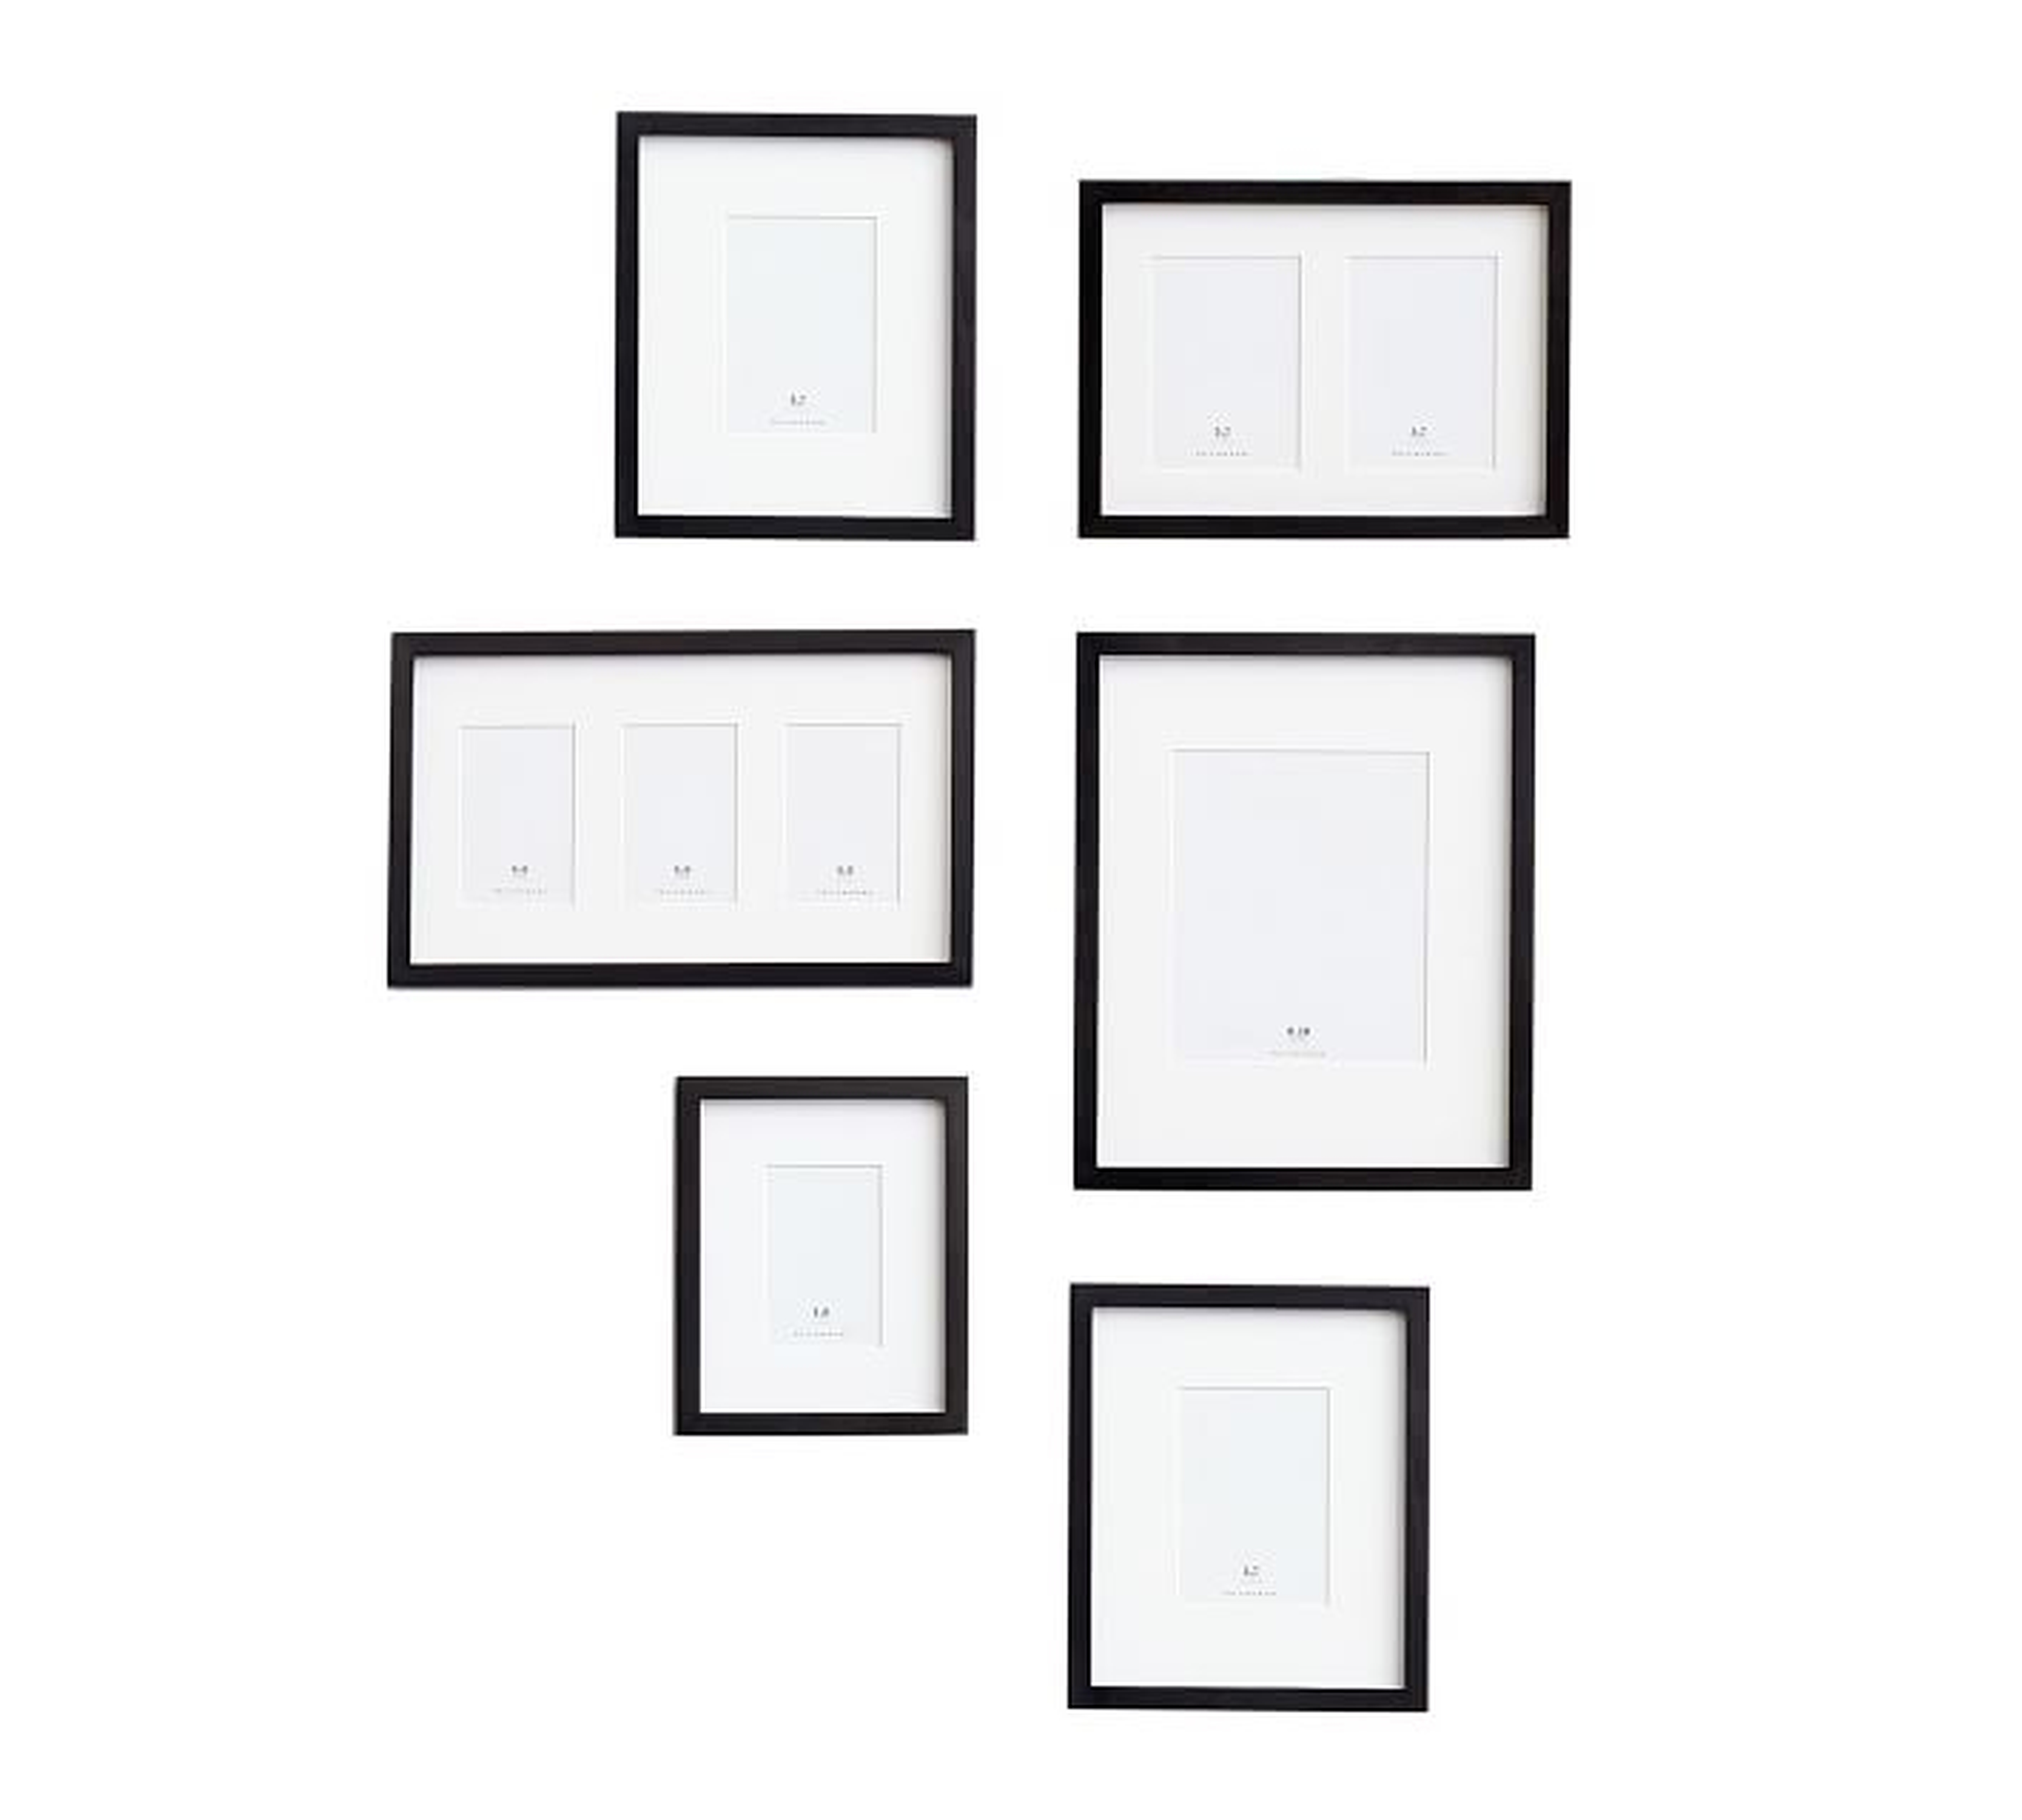 Gallery in a Box, Black Frames, Set of 6 - Pottery Barn